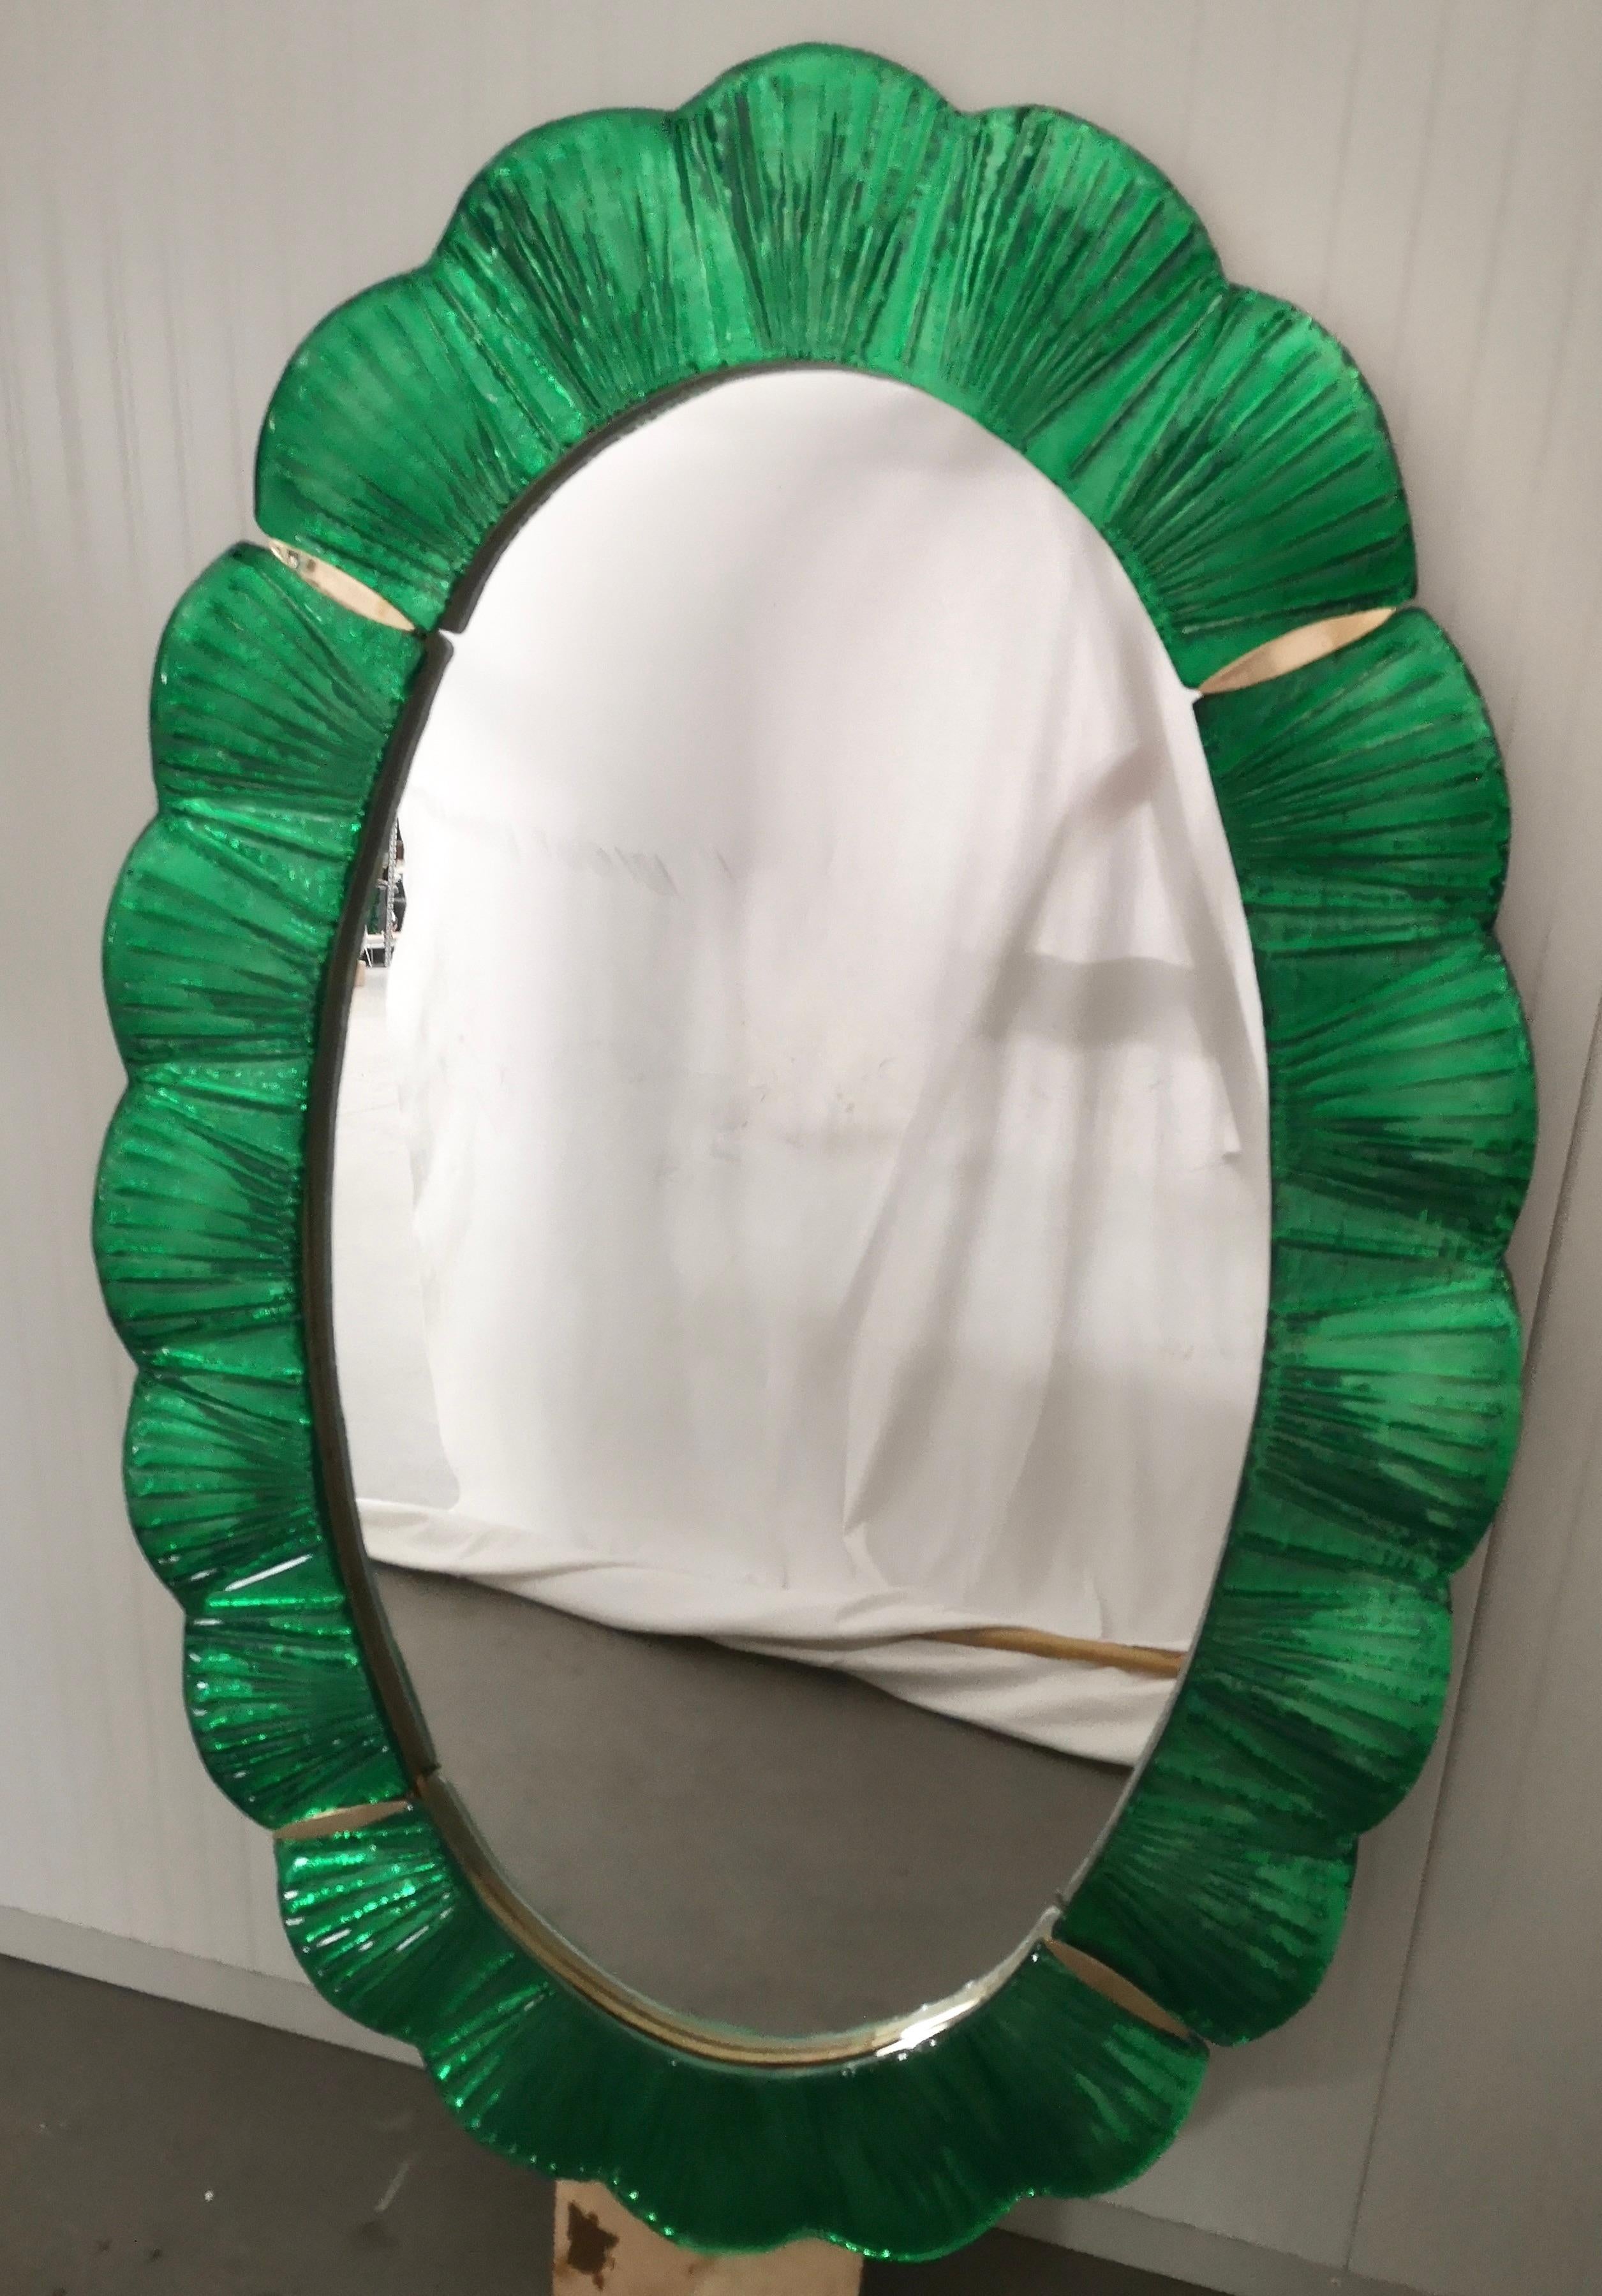 Stunning mirror in blazing green color Murano glass, Venice. A mirror that alone will furnish your home environment.

The mirror has a rear structure in wood, on which four Murano glass sections are mounted to form an oval as in the photograph. The